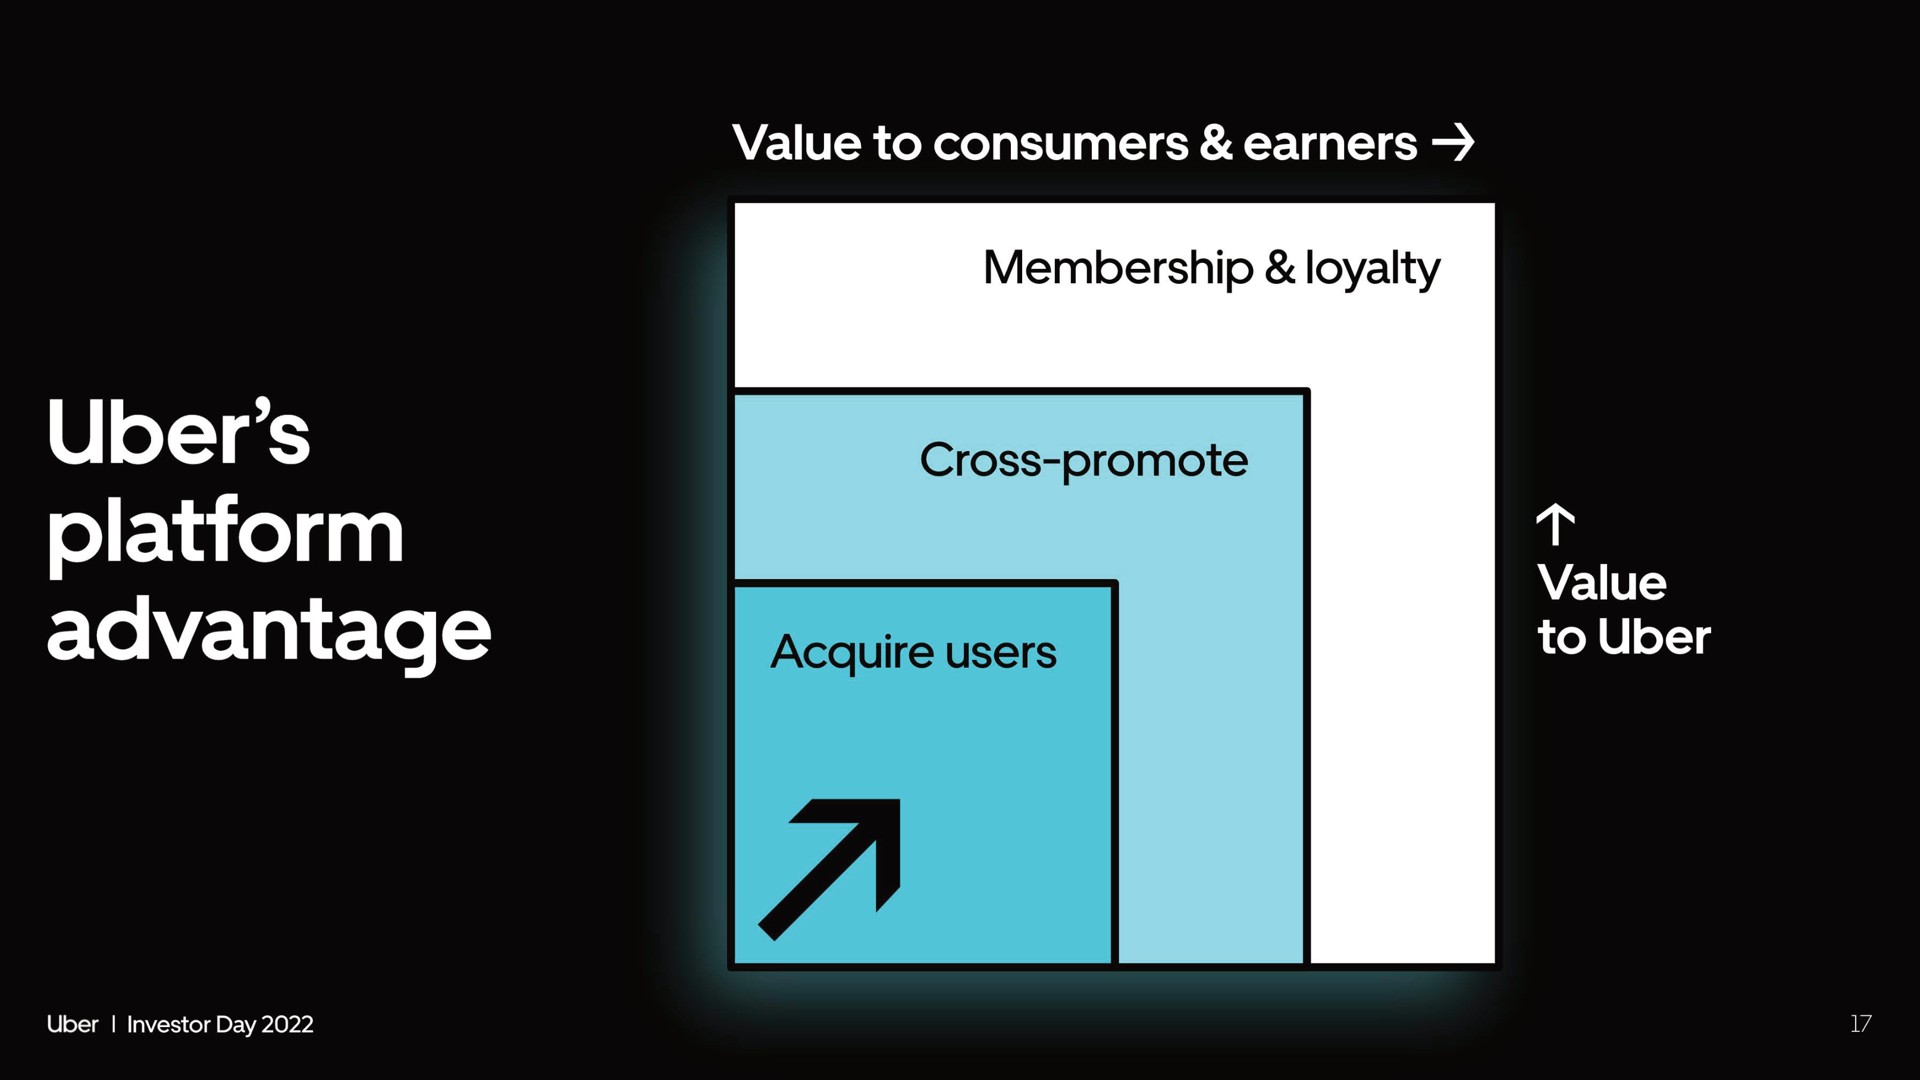 ber advantage membership loyalty cross promote acquire users a reaver | Uber